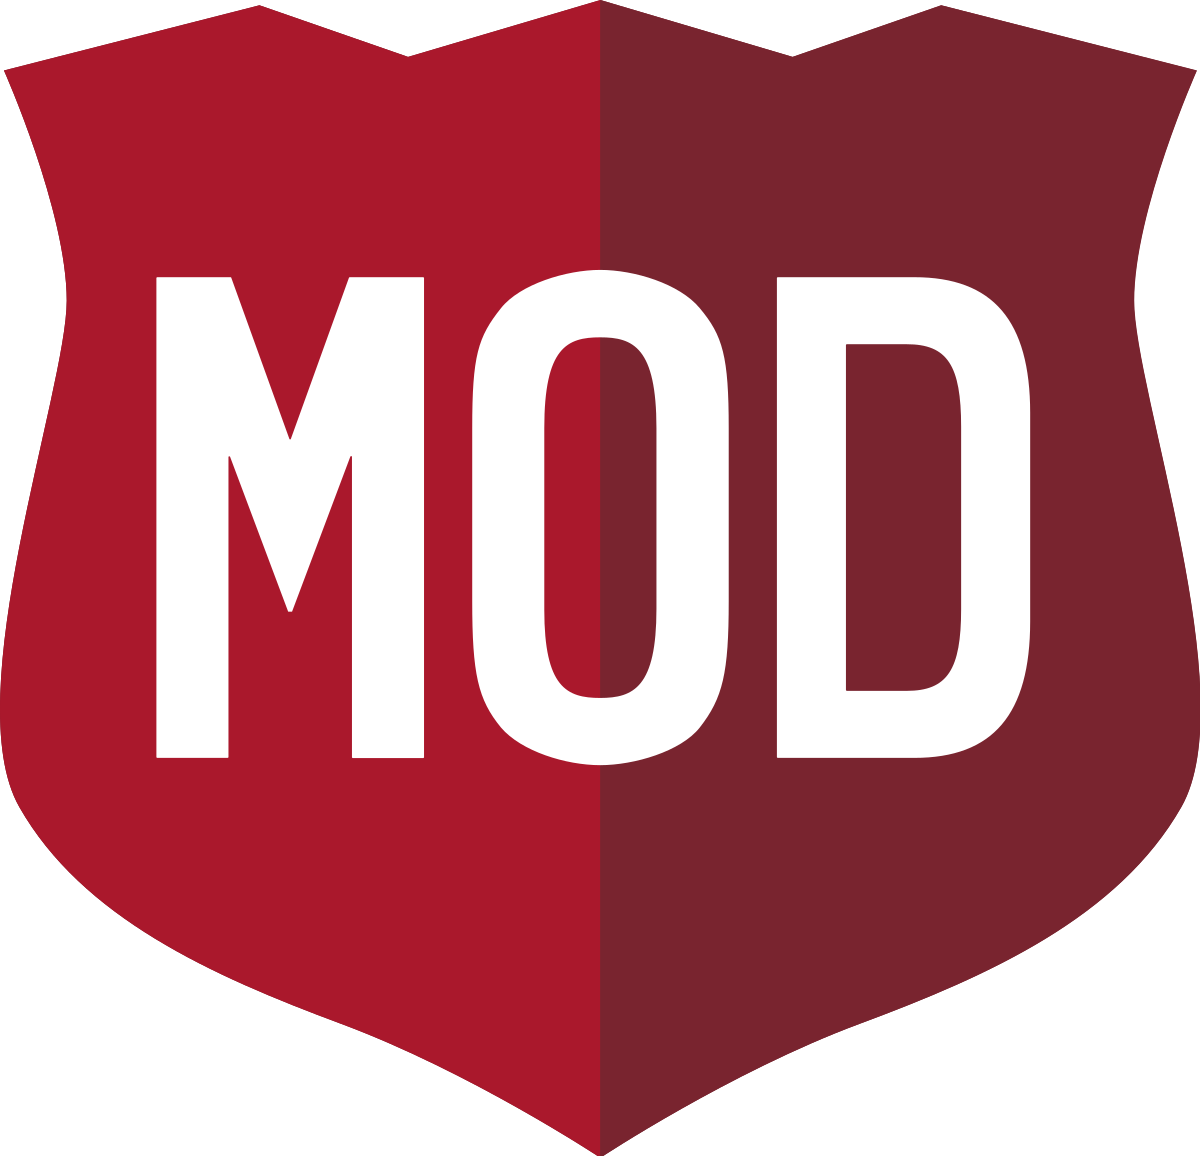 MOD Pizza | Buy one MOD-size pizza or salad, get one MOD-size pizza or salad for free.